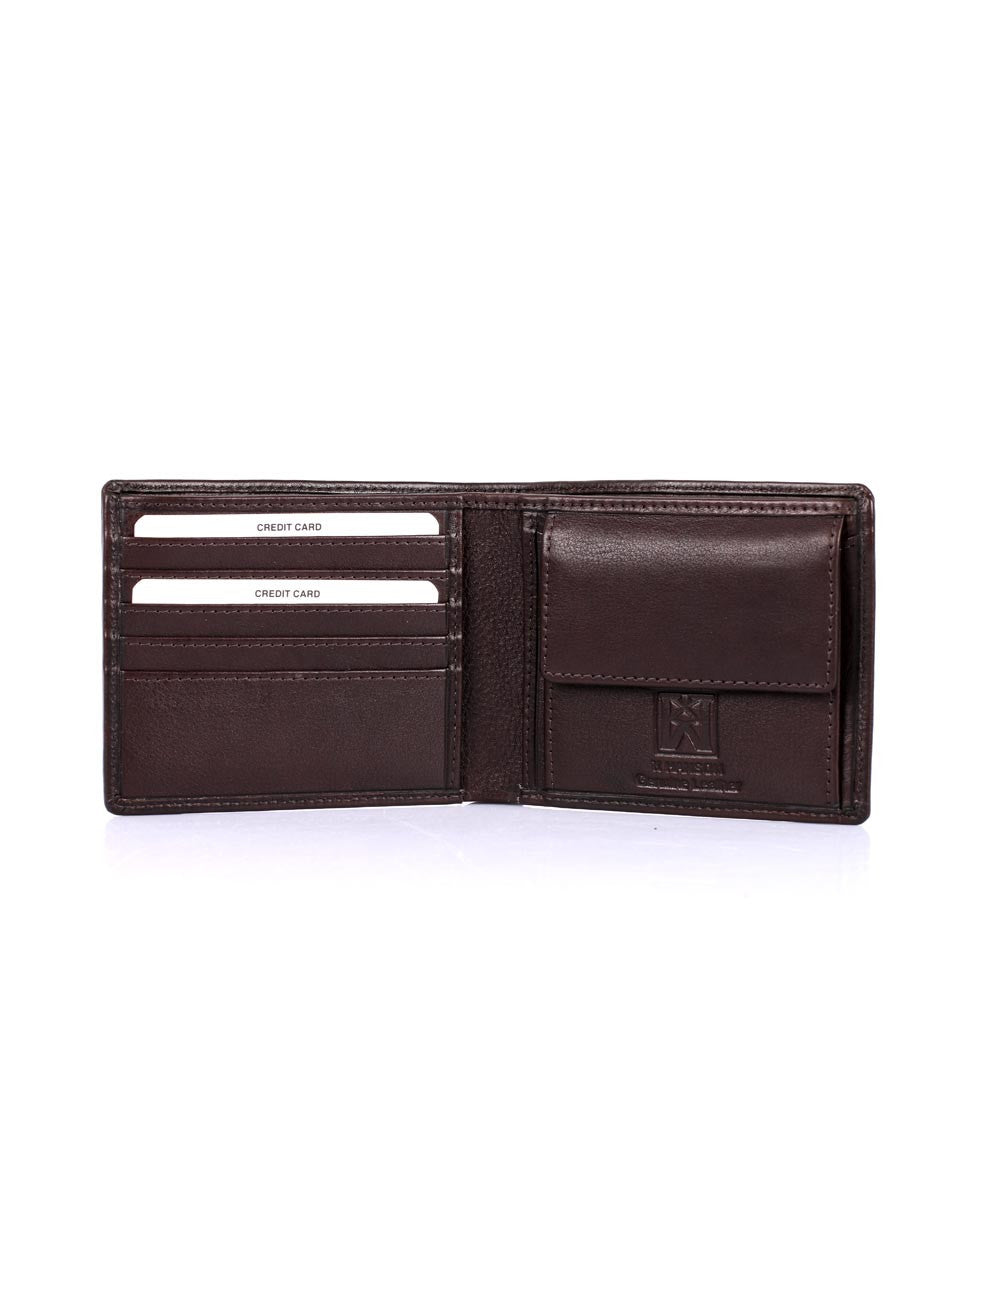 Mens Wallet With Coin Pocket, Mens Coin Wallet, Personalized Bifold Wallet,  Monogram Mens Wallet, Gift for Him - Etsy